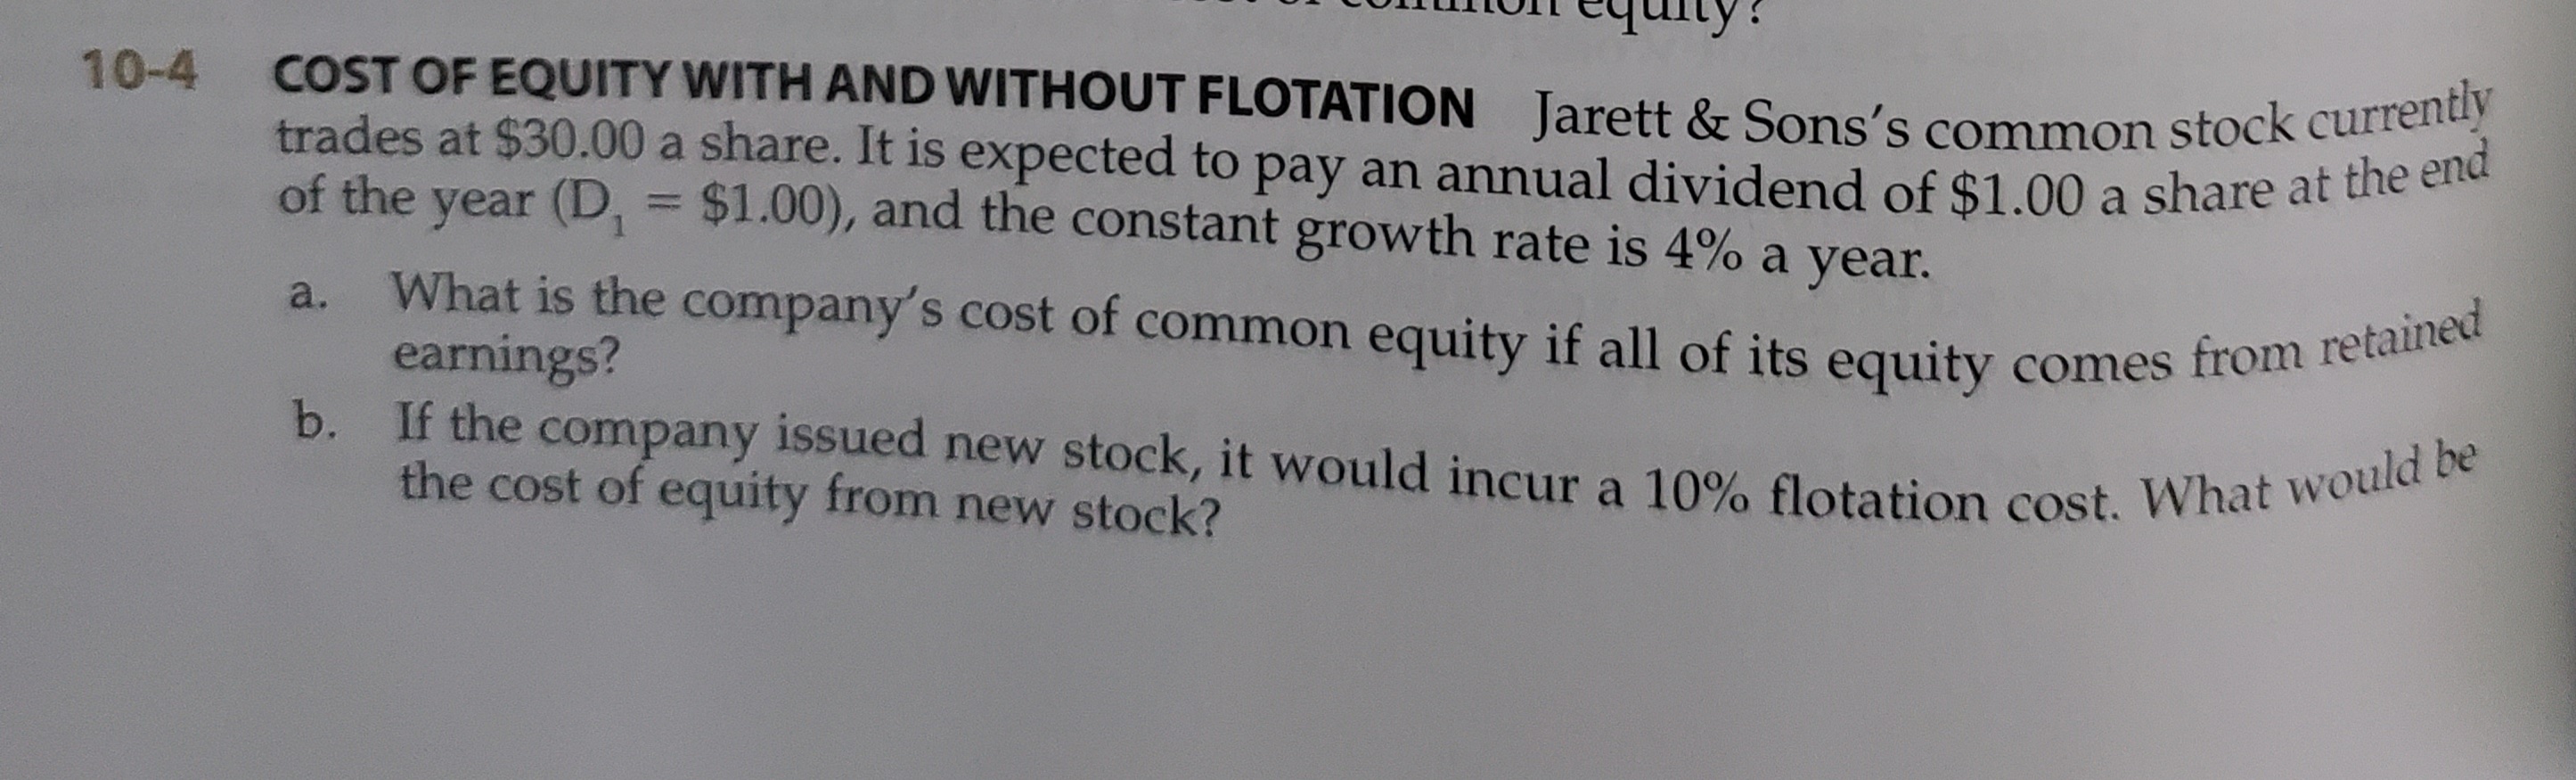 COST OF EQUITY WITH AND WITHOUT FLOTATION Jarett & Sons's common stock currently
trades at $30.00 a share. It is expected to pay an annual dividend of $1.00 a share at the cie
of the year (D, = $1.00), and the constant growth rate is 4% a year.
%3D
What is the company's cost of common equity if all of its equity comes from feta
earnings?
a.
b. If the company issued new stock, it would incur a 10% flotation cost. What would be
the cost of equity from new stock?
